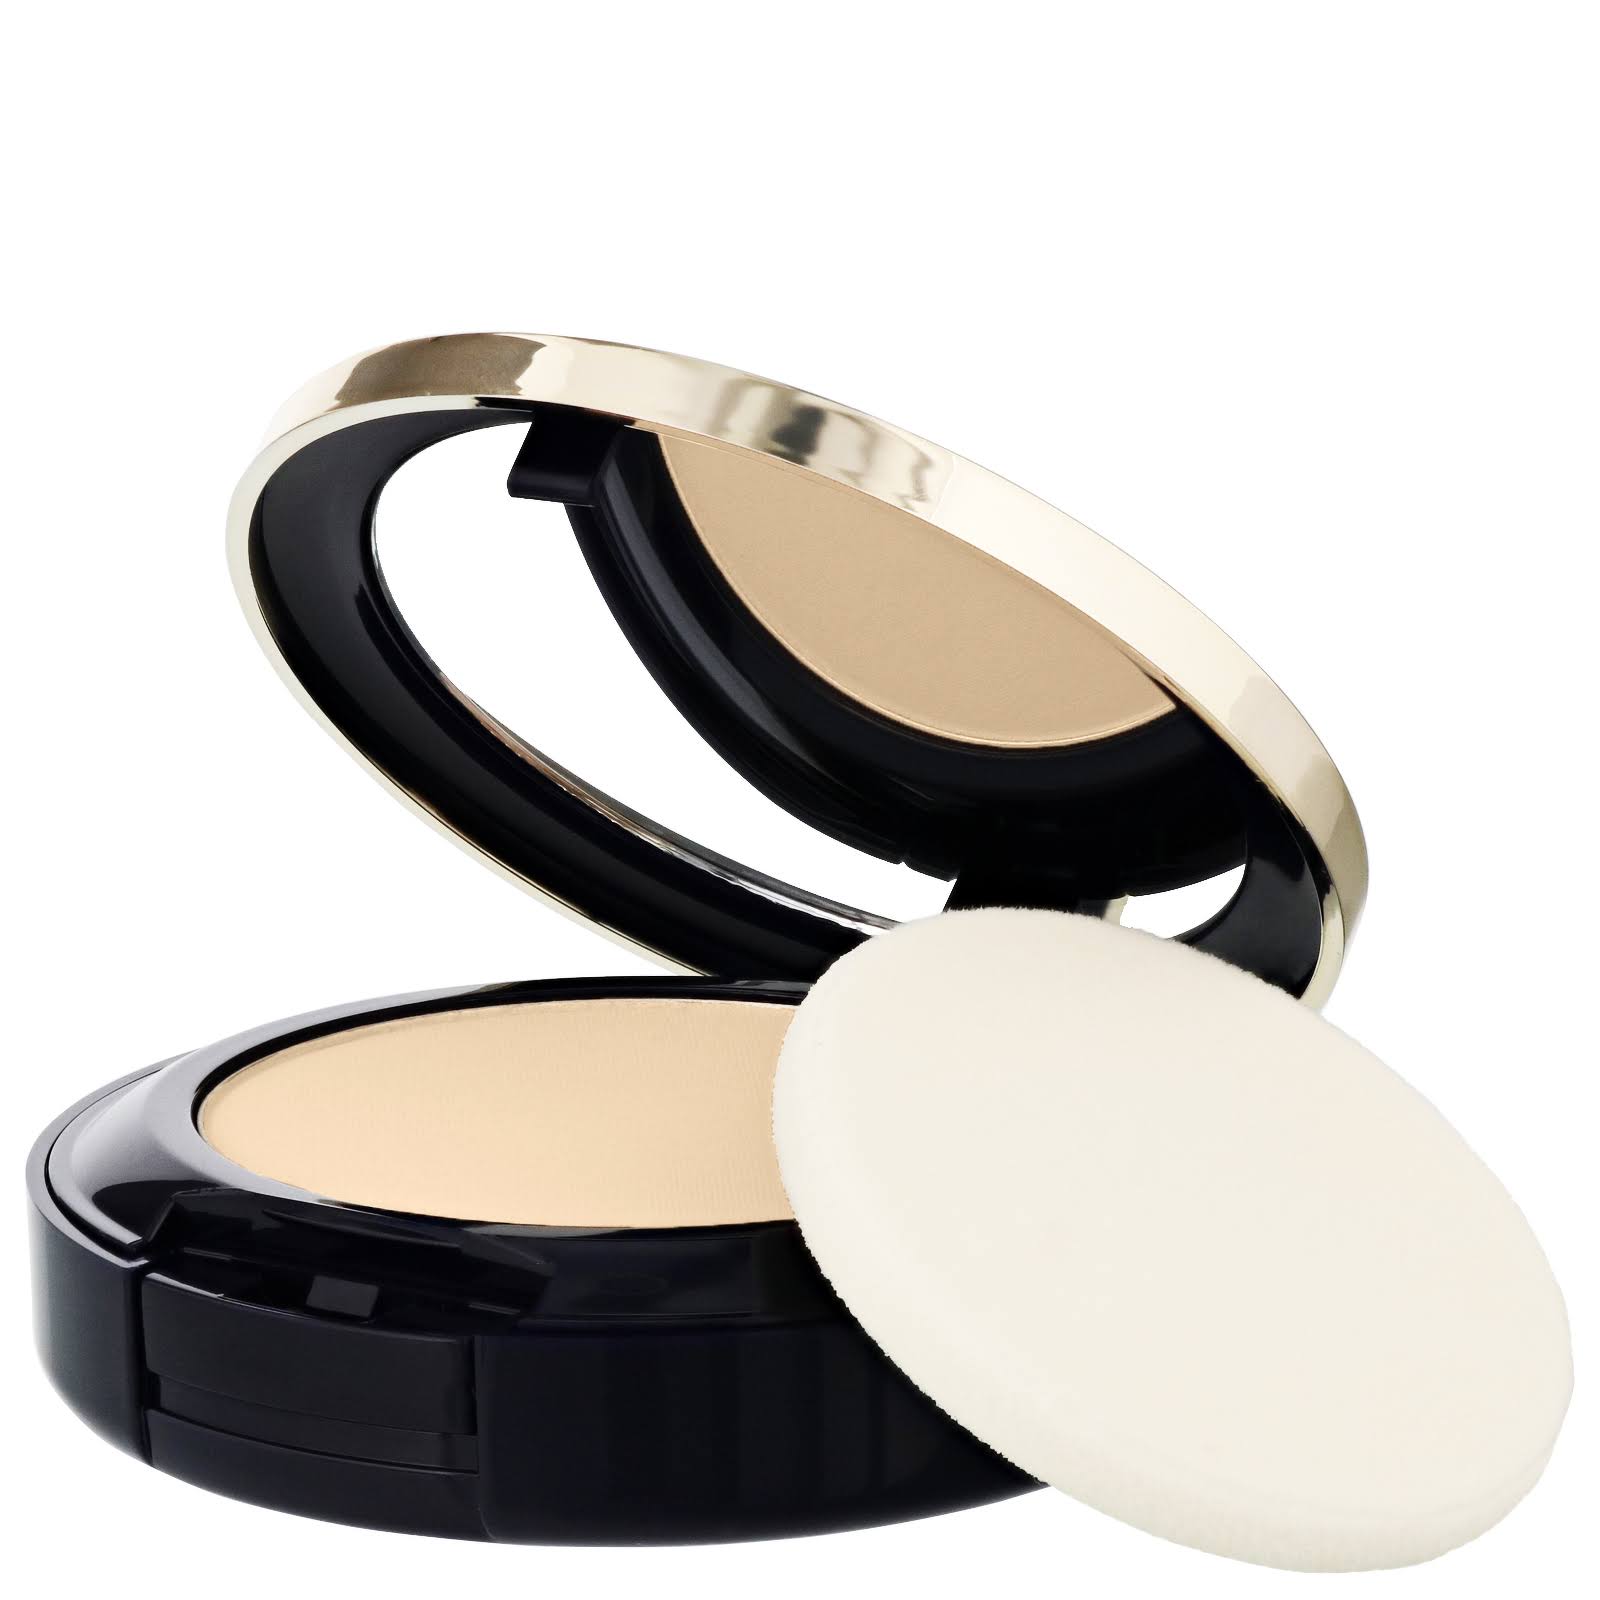 Estee Lauder Double Wear Stay-in-Place Powder Makeup SPF10 12g